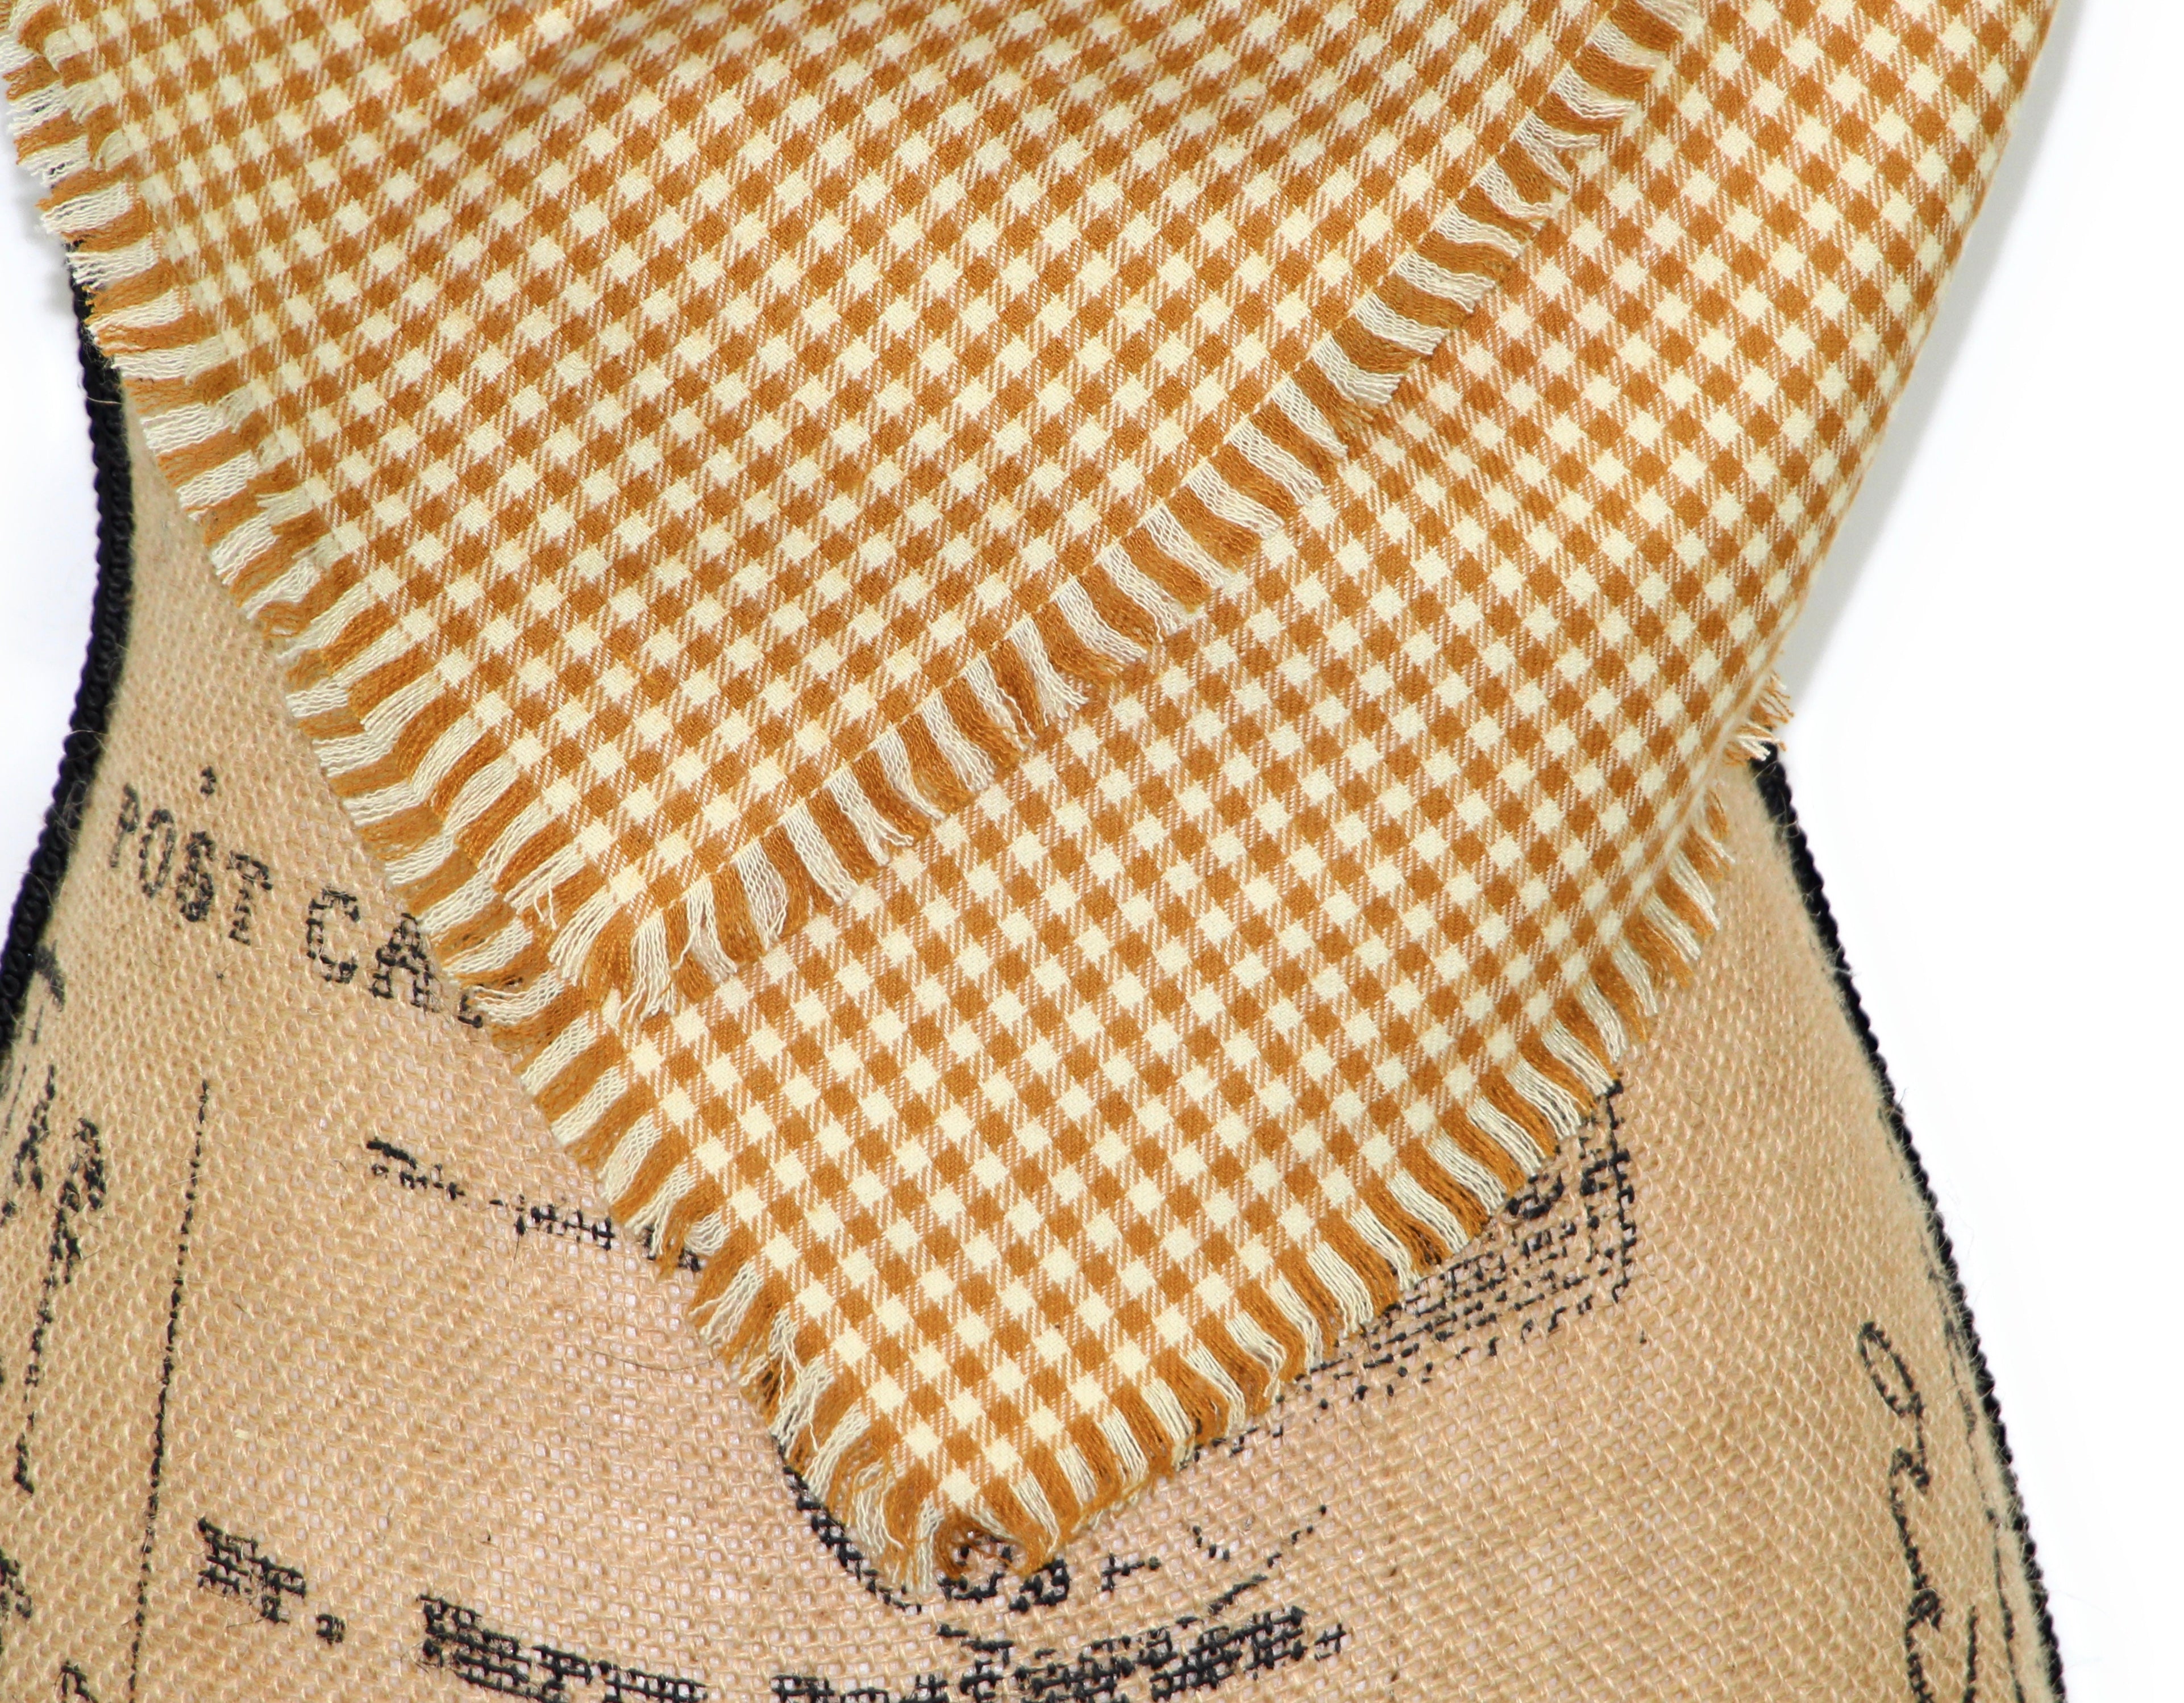 Butterscotch Orange/Mustard Yellow and Cream Small Check Gingham Plaid Lightweight Infinity or Blanket Scarf